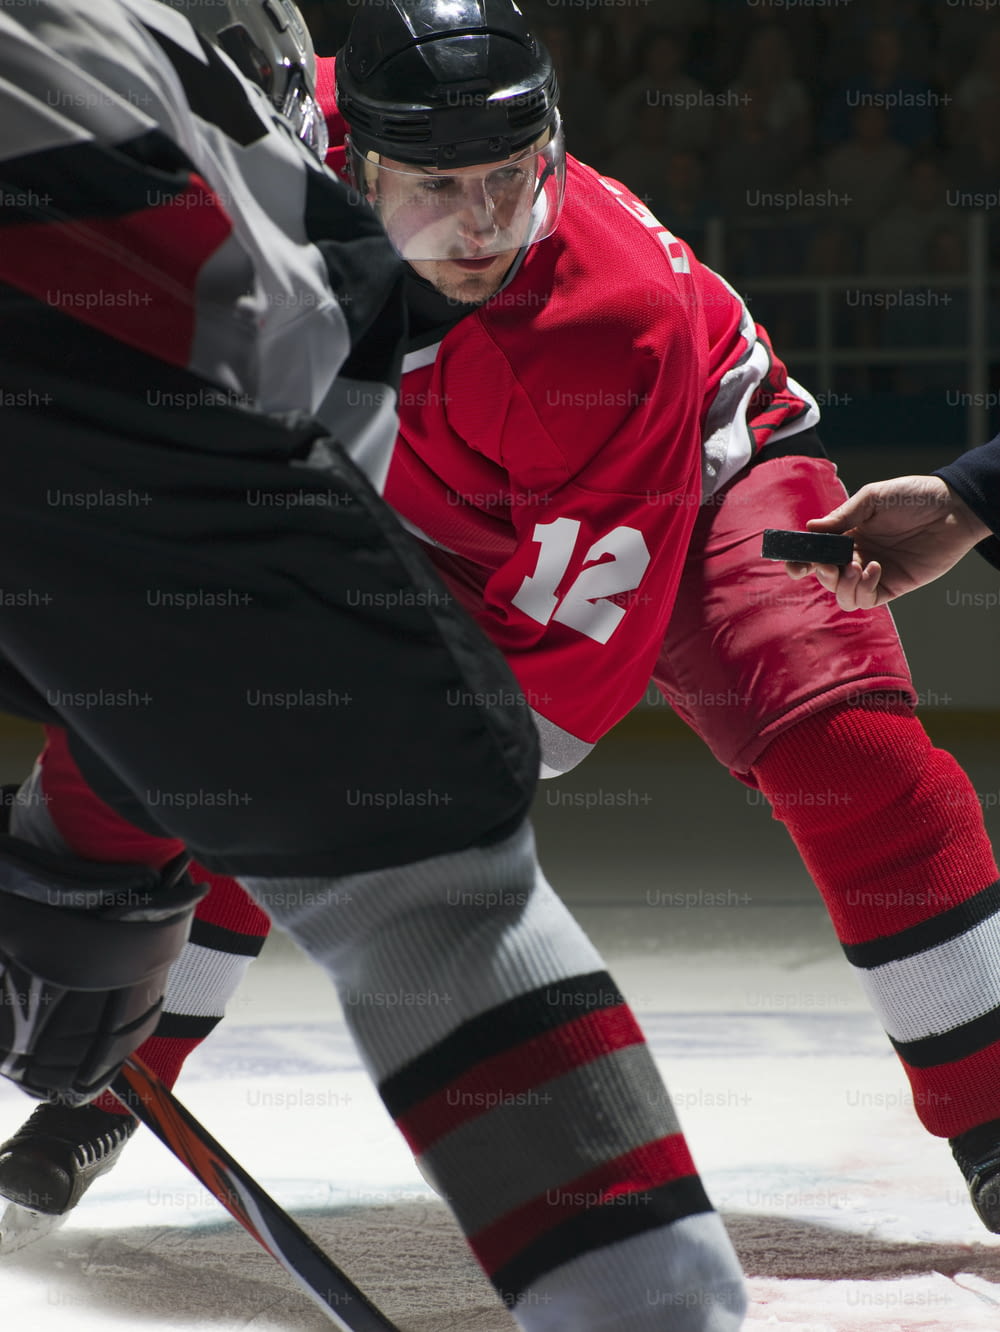 a man in a red jersey is playing ice hockey